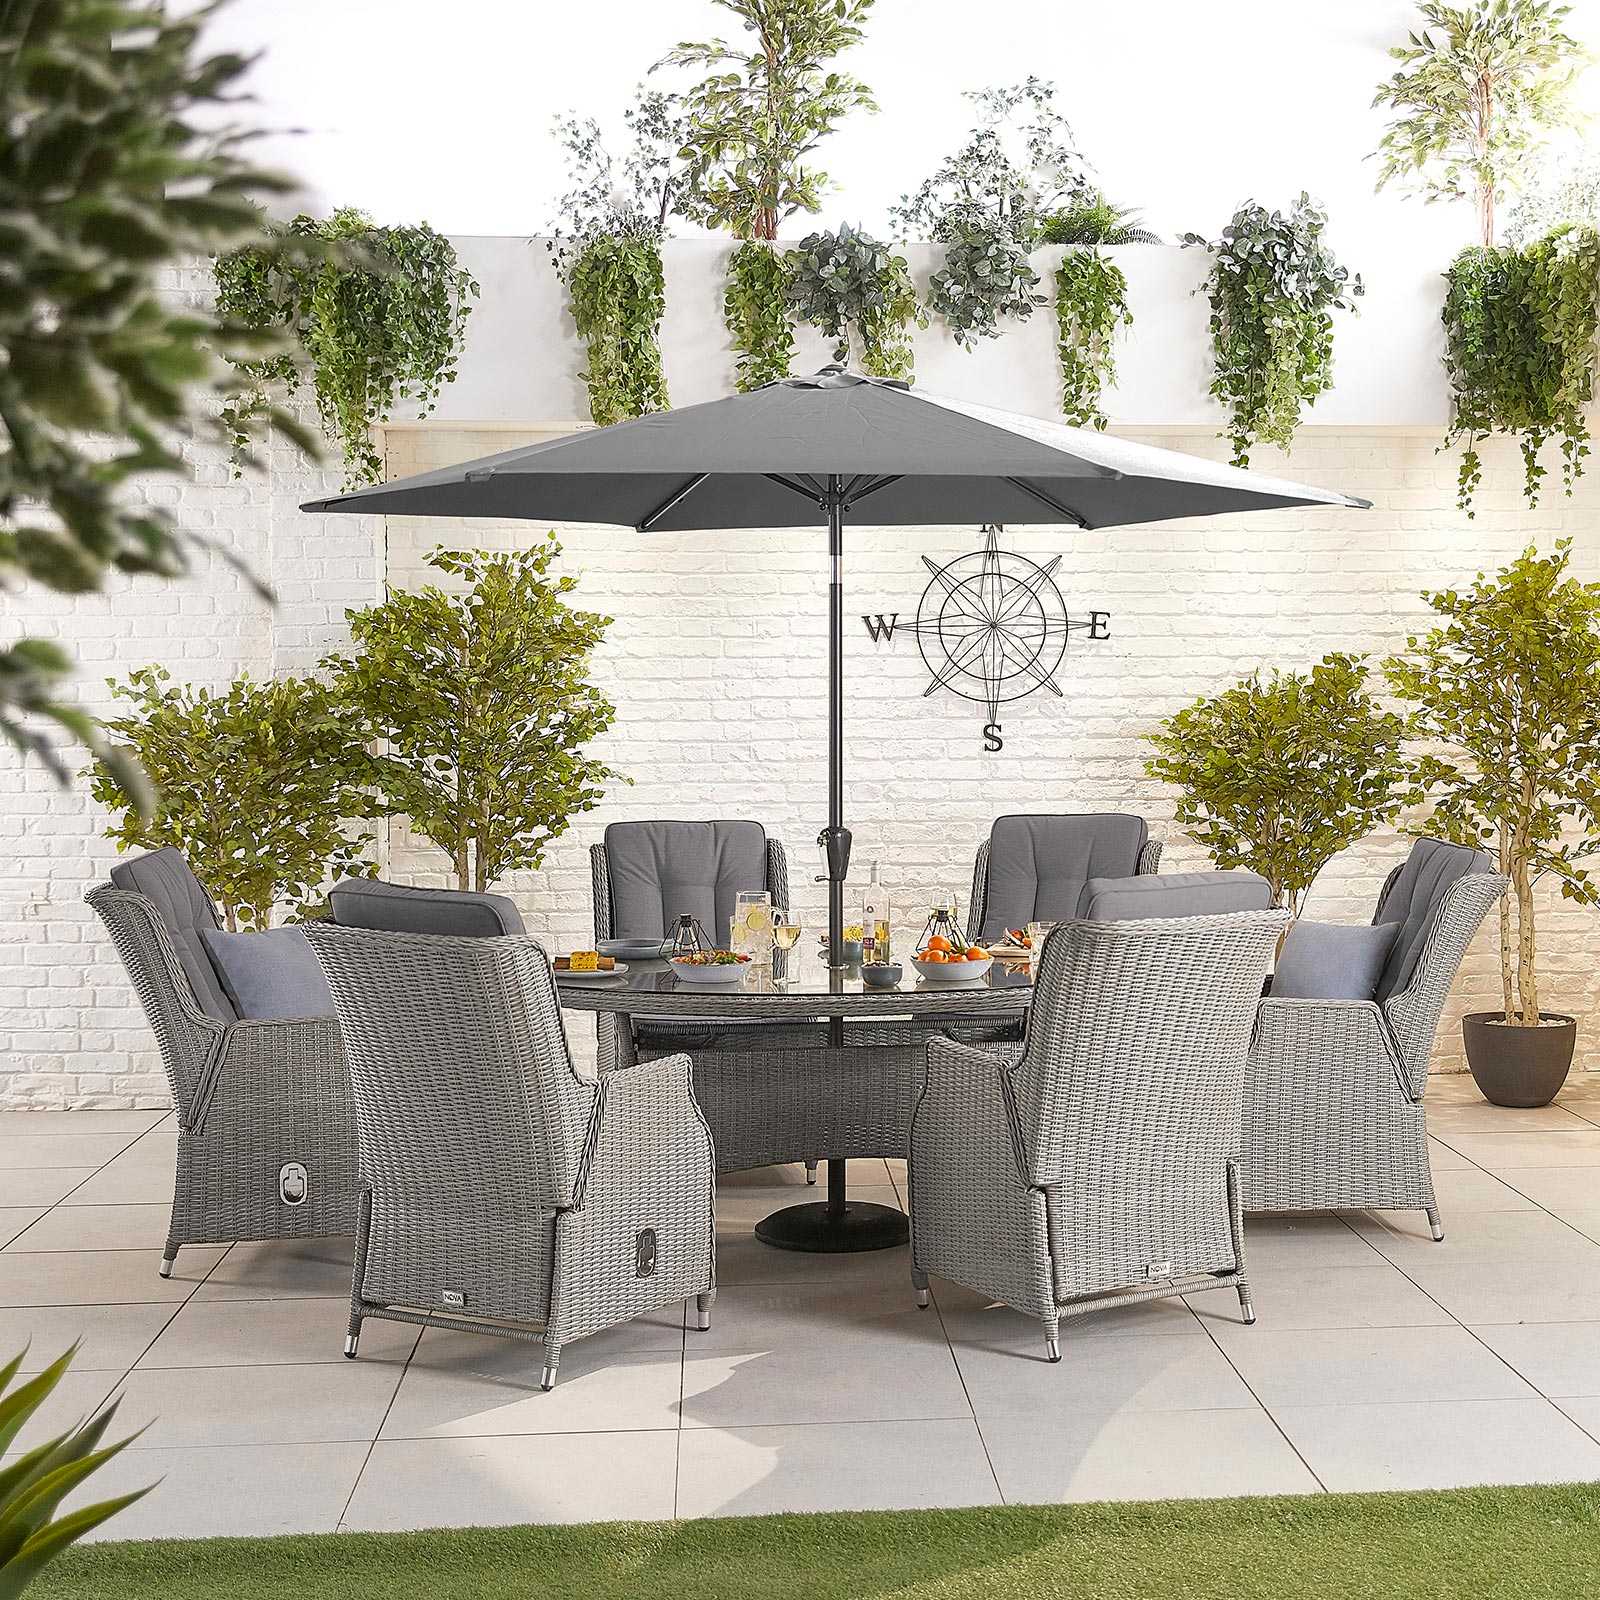 Carolina Outdoor 6 Seat Oval Dining Set by Nova in White Wash